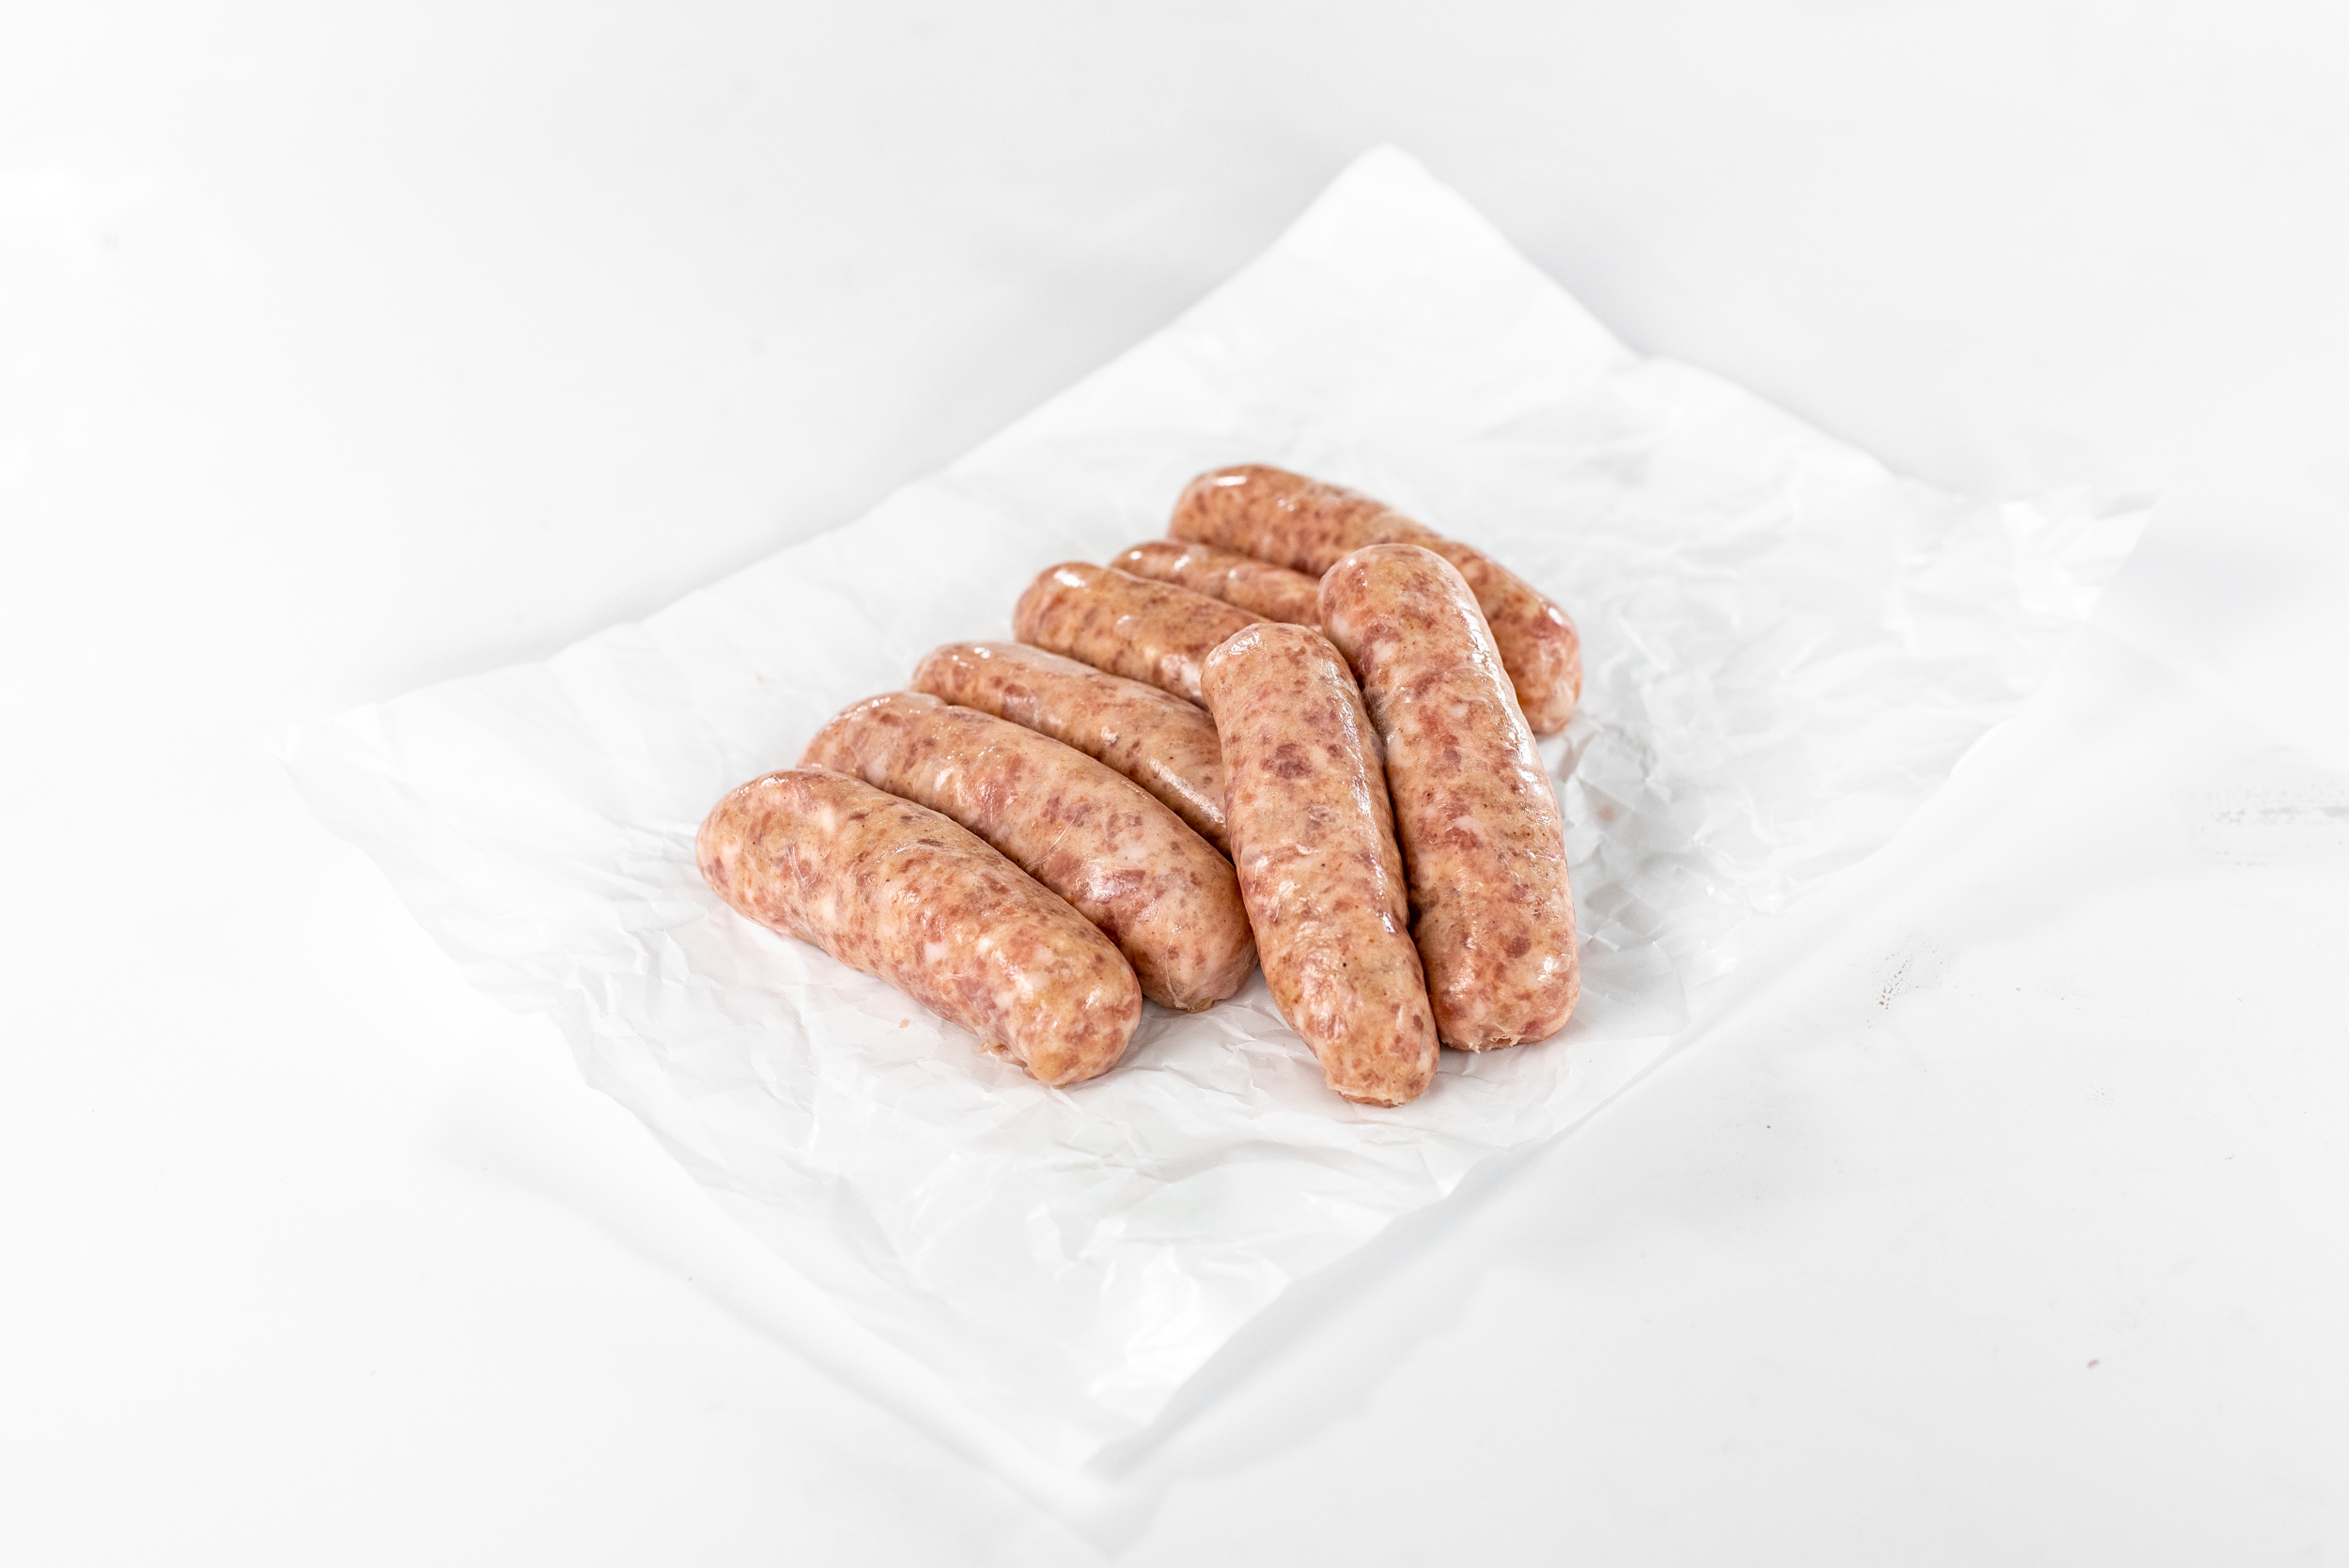 Free from Gluten Pork Sausages (8 Pack)